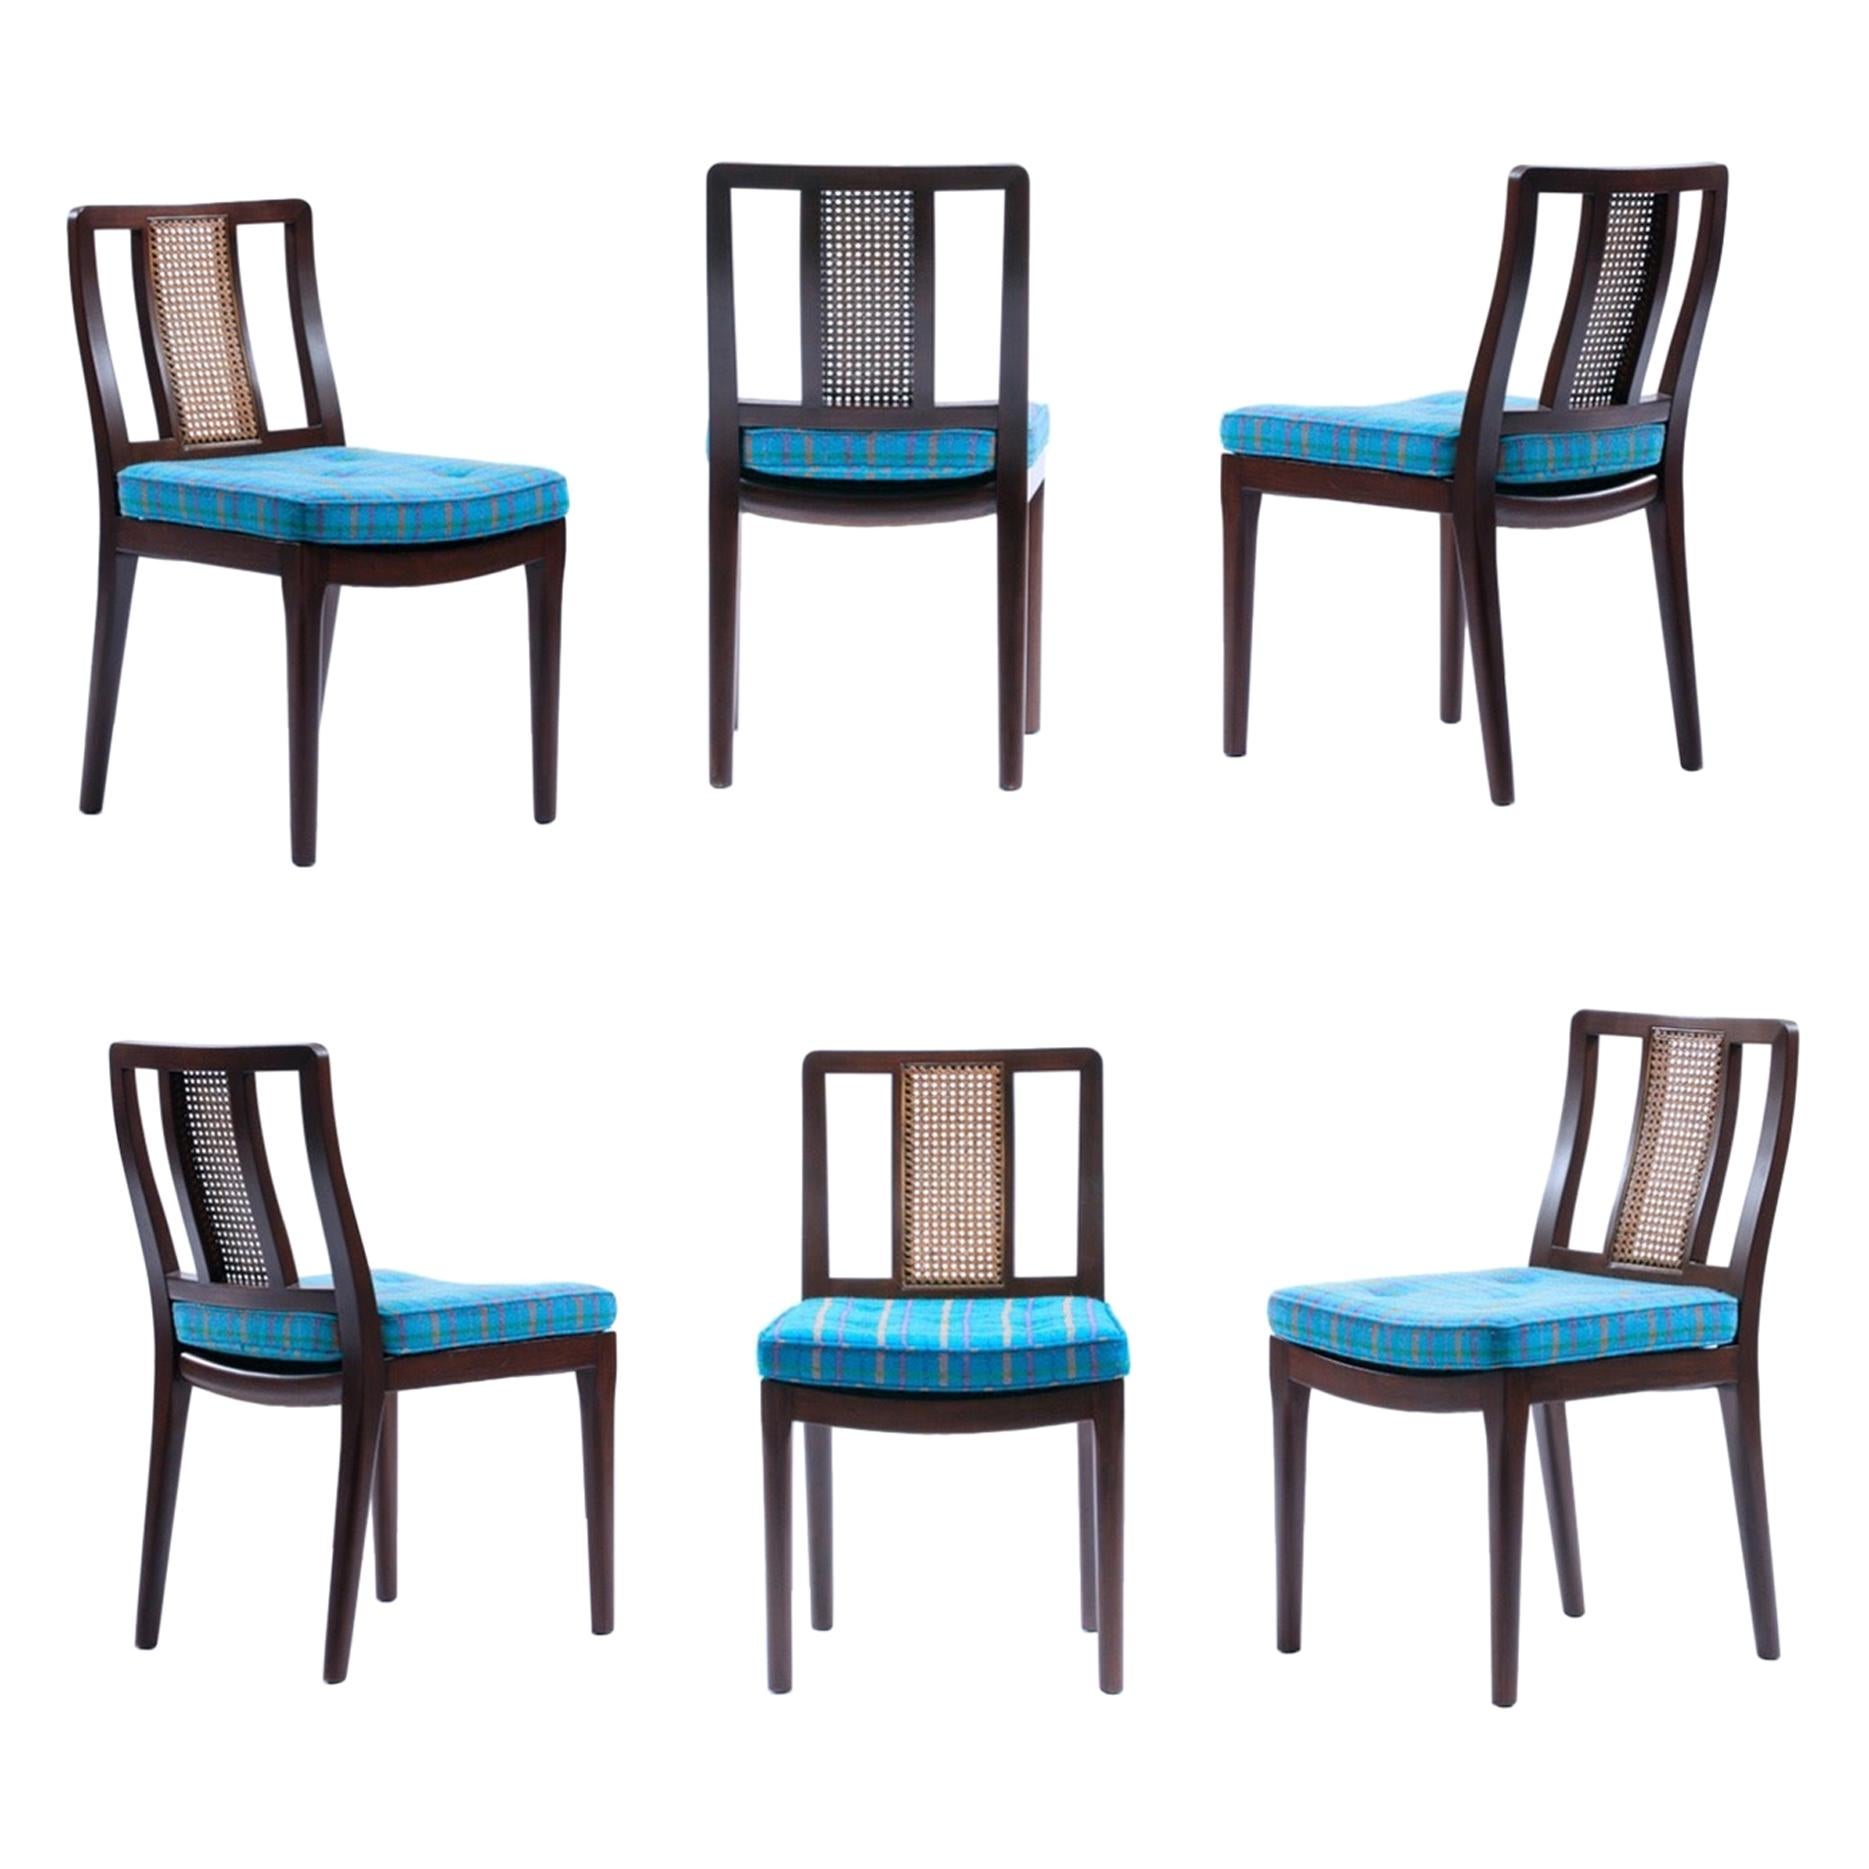 Set of 6 Edward Wormley for Dunbar Blue Dining Chairs with Cane Backs, c. 1958